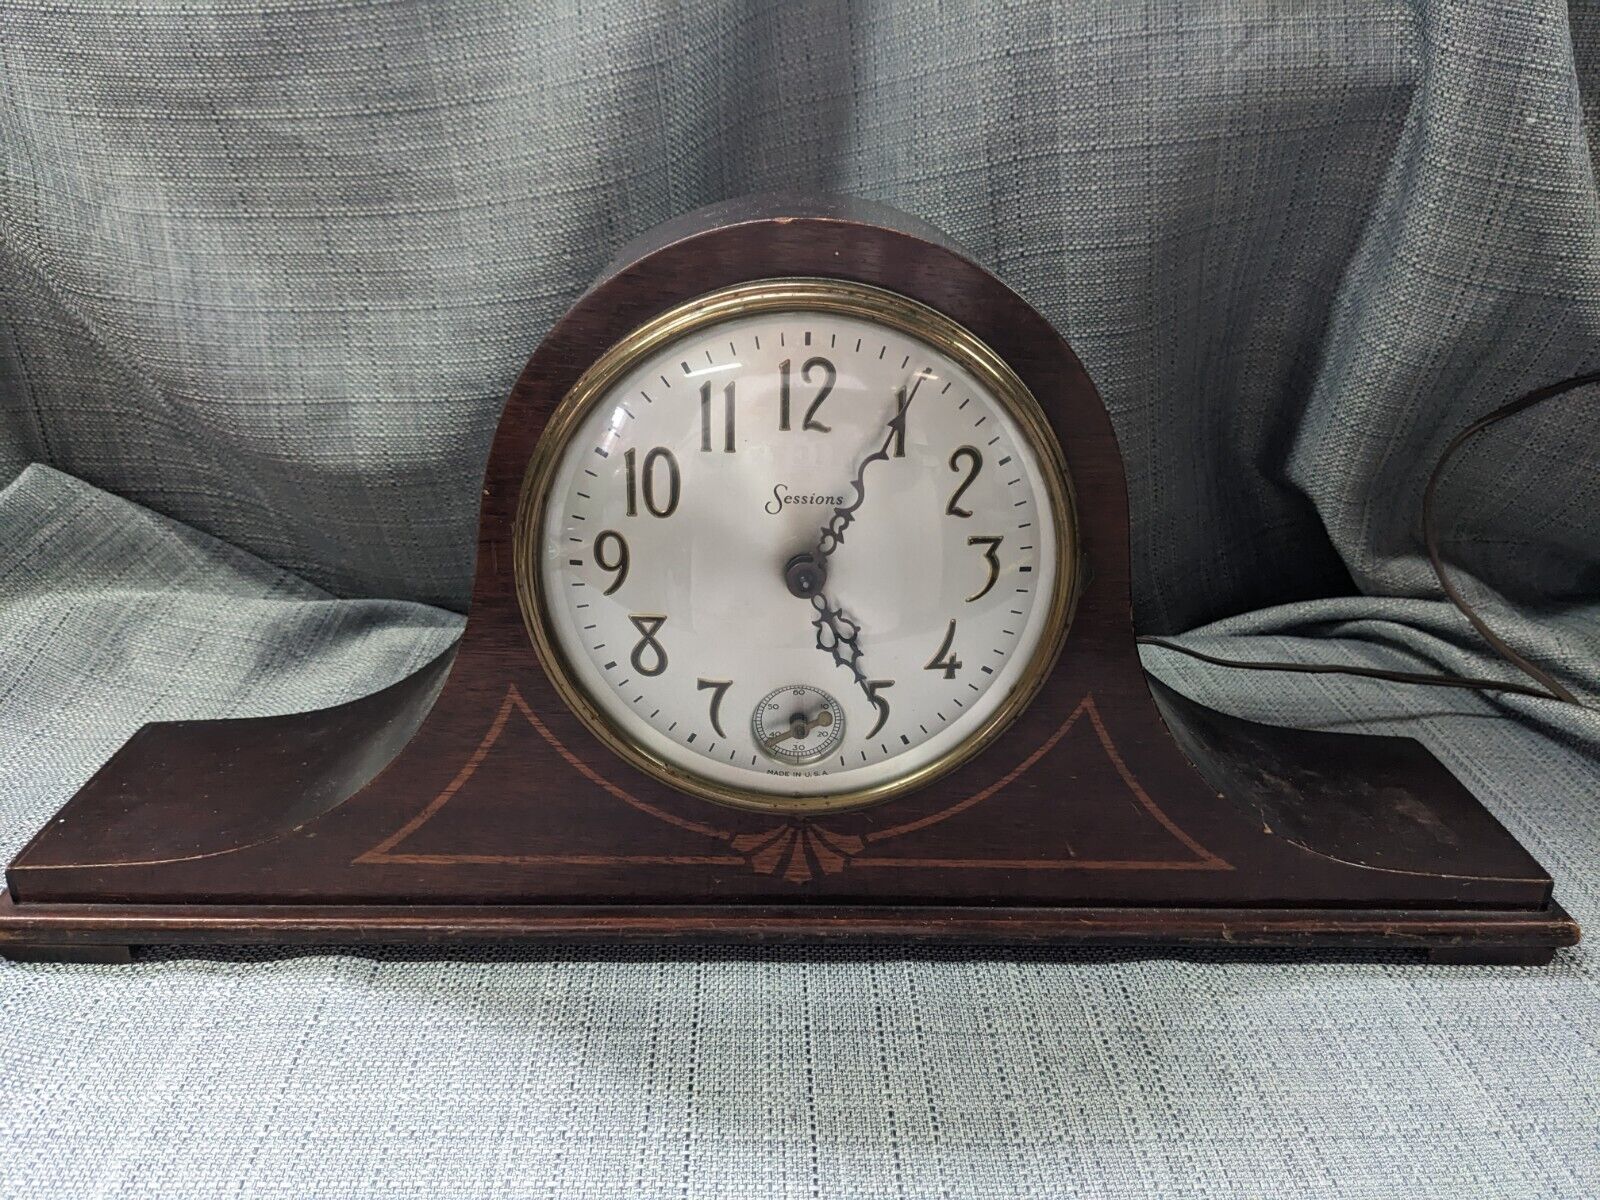 Antique Sessions Mantle Shelf Clock 2 rod Chime wood 60 cycles Electric USA